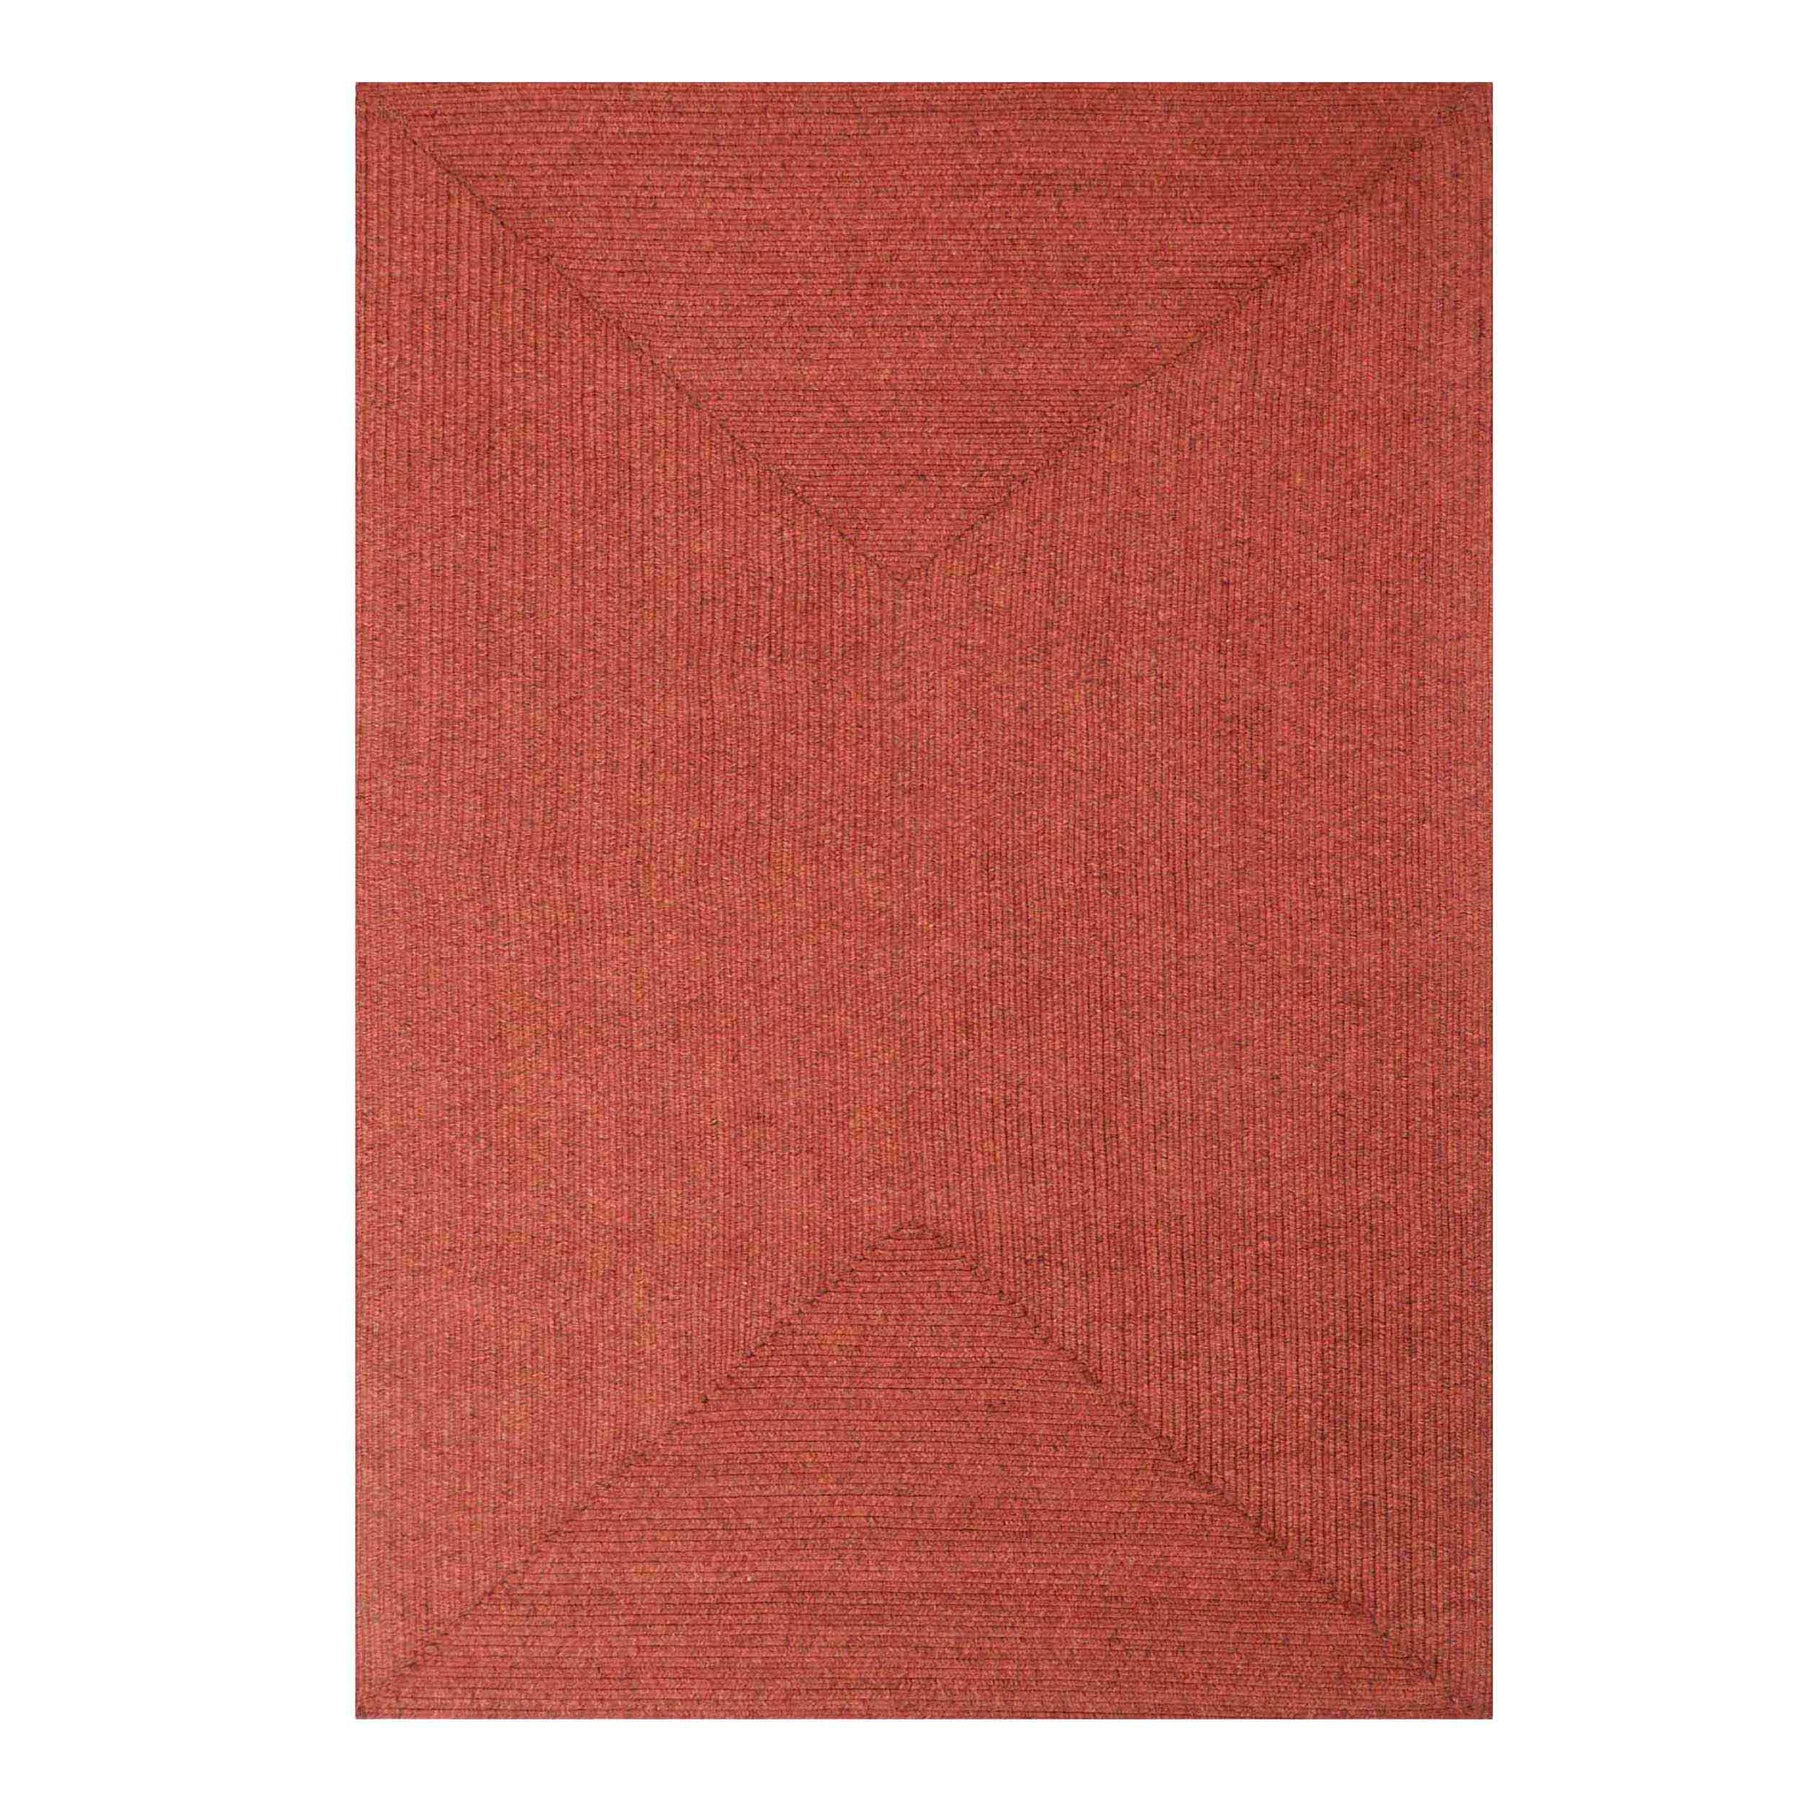 Bohemian Indoor Outdoor Rugs Solid Rectangle Braided Area Rug - Brick